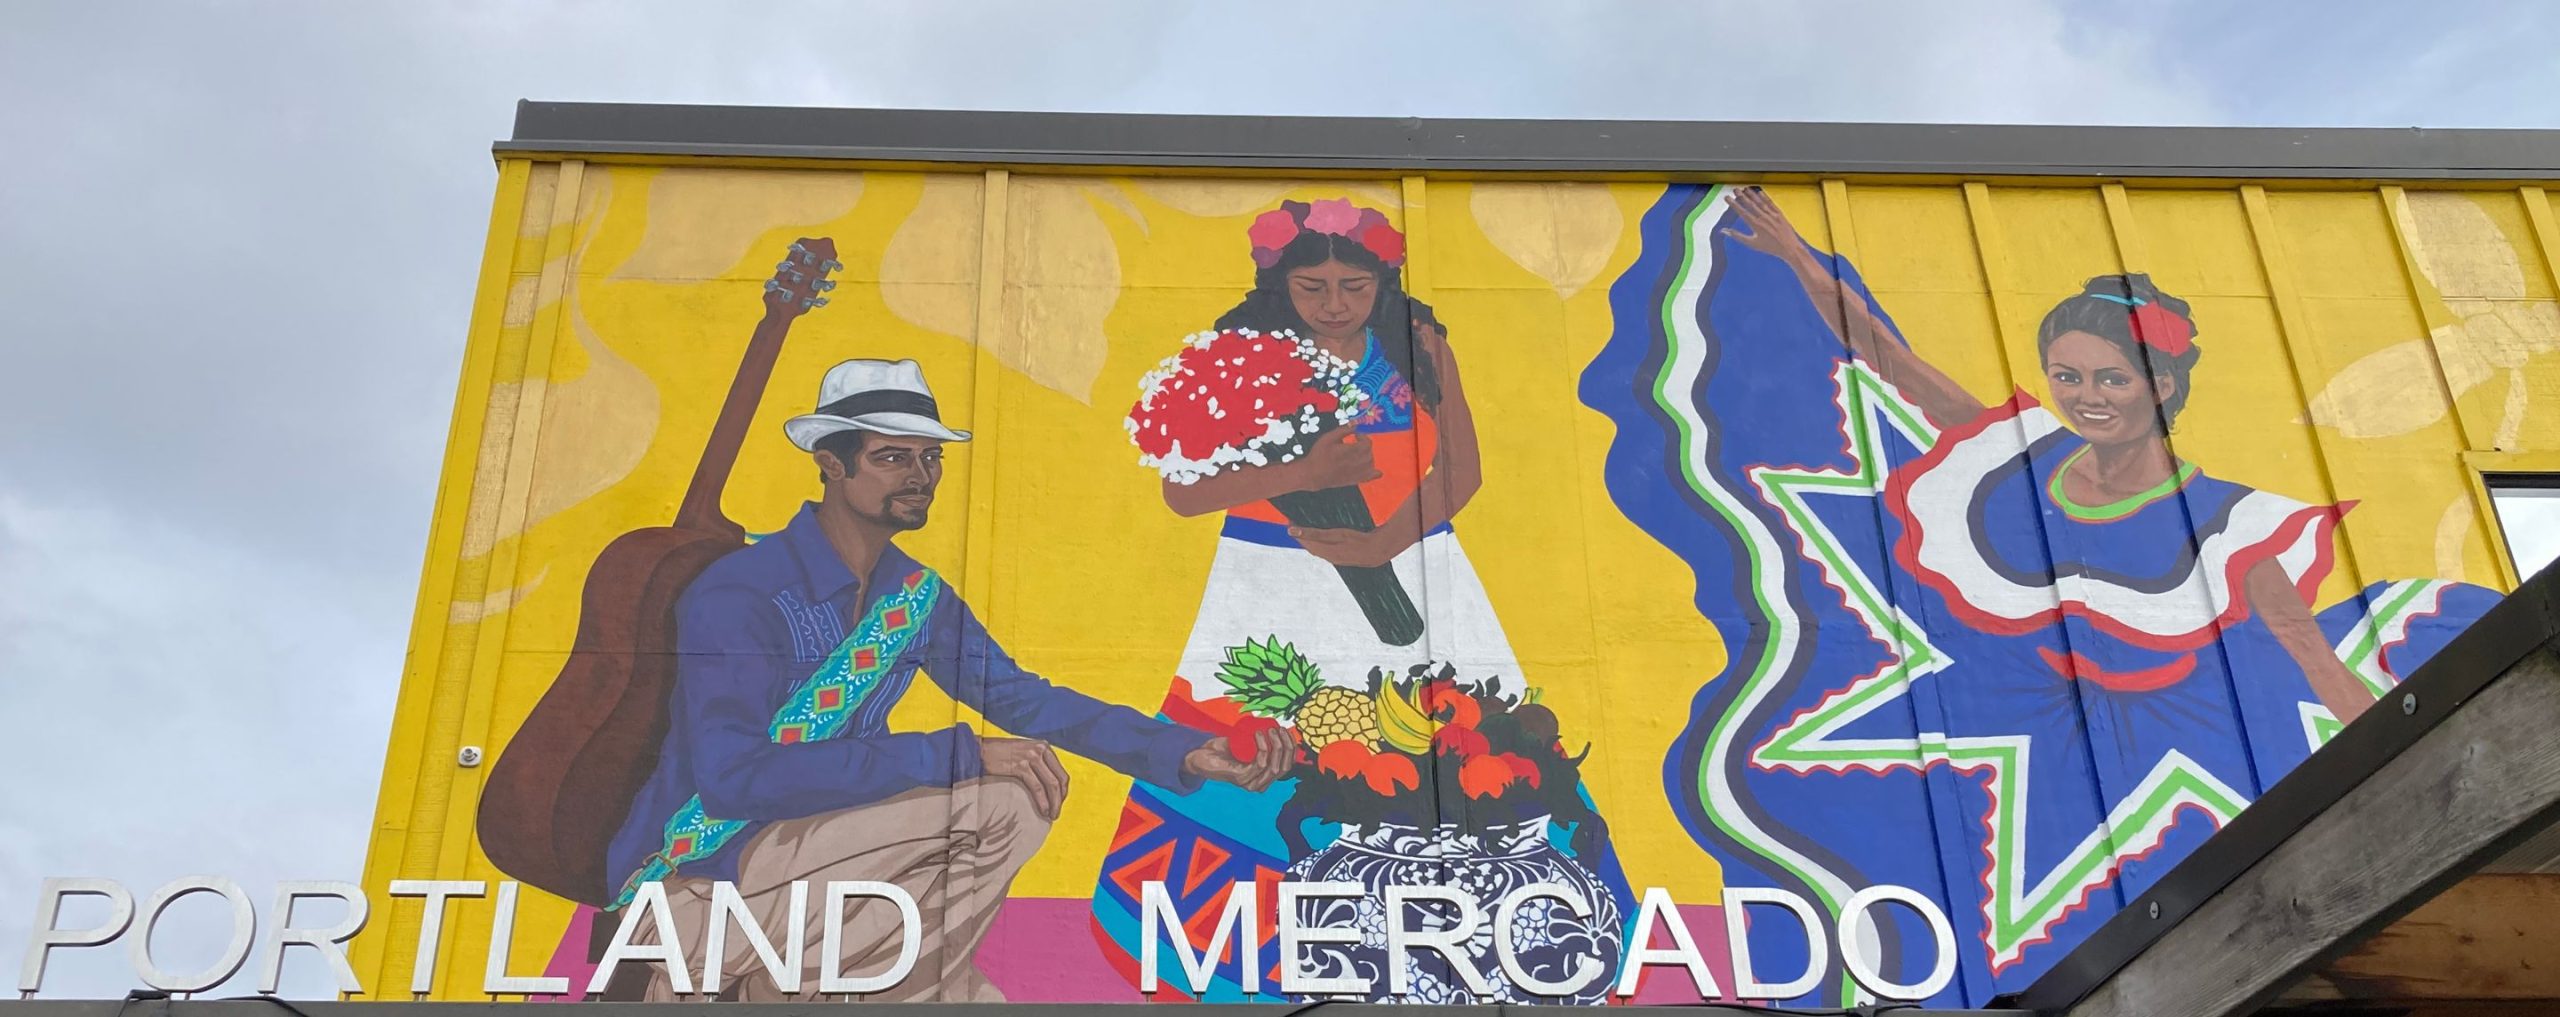 portland mercado front entrance, which has a yellow background and three people playing music and dancing